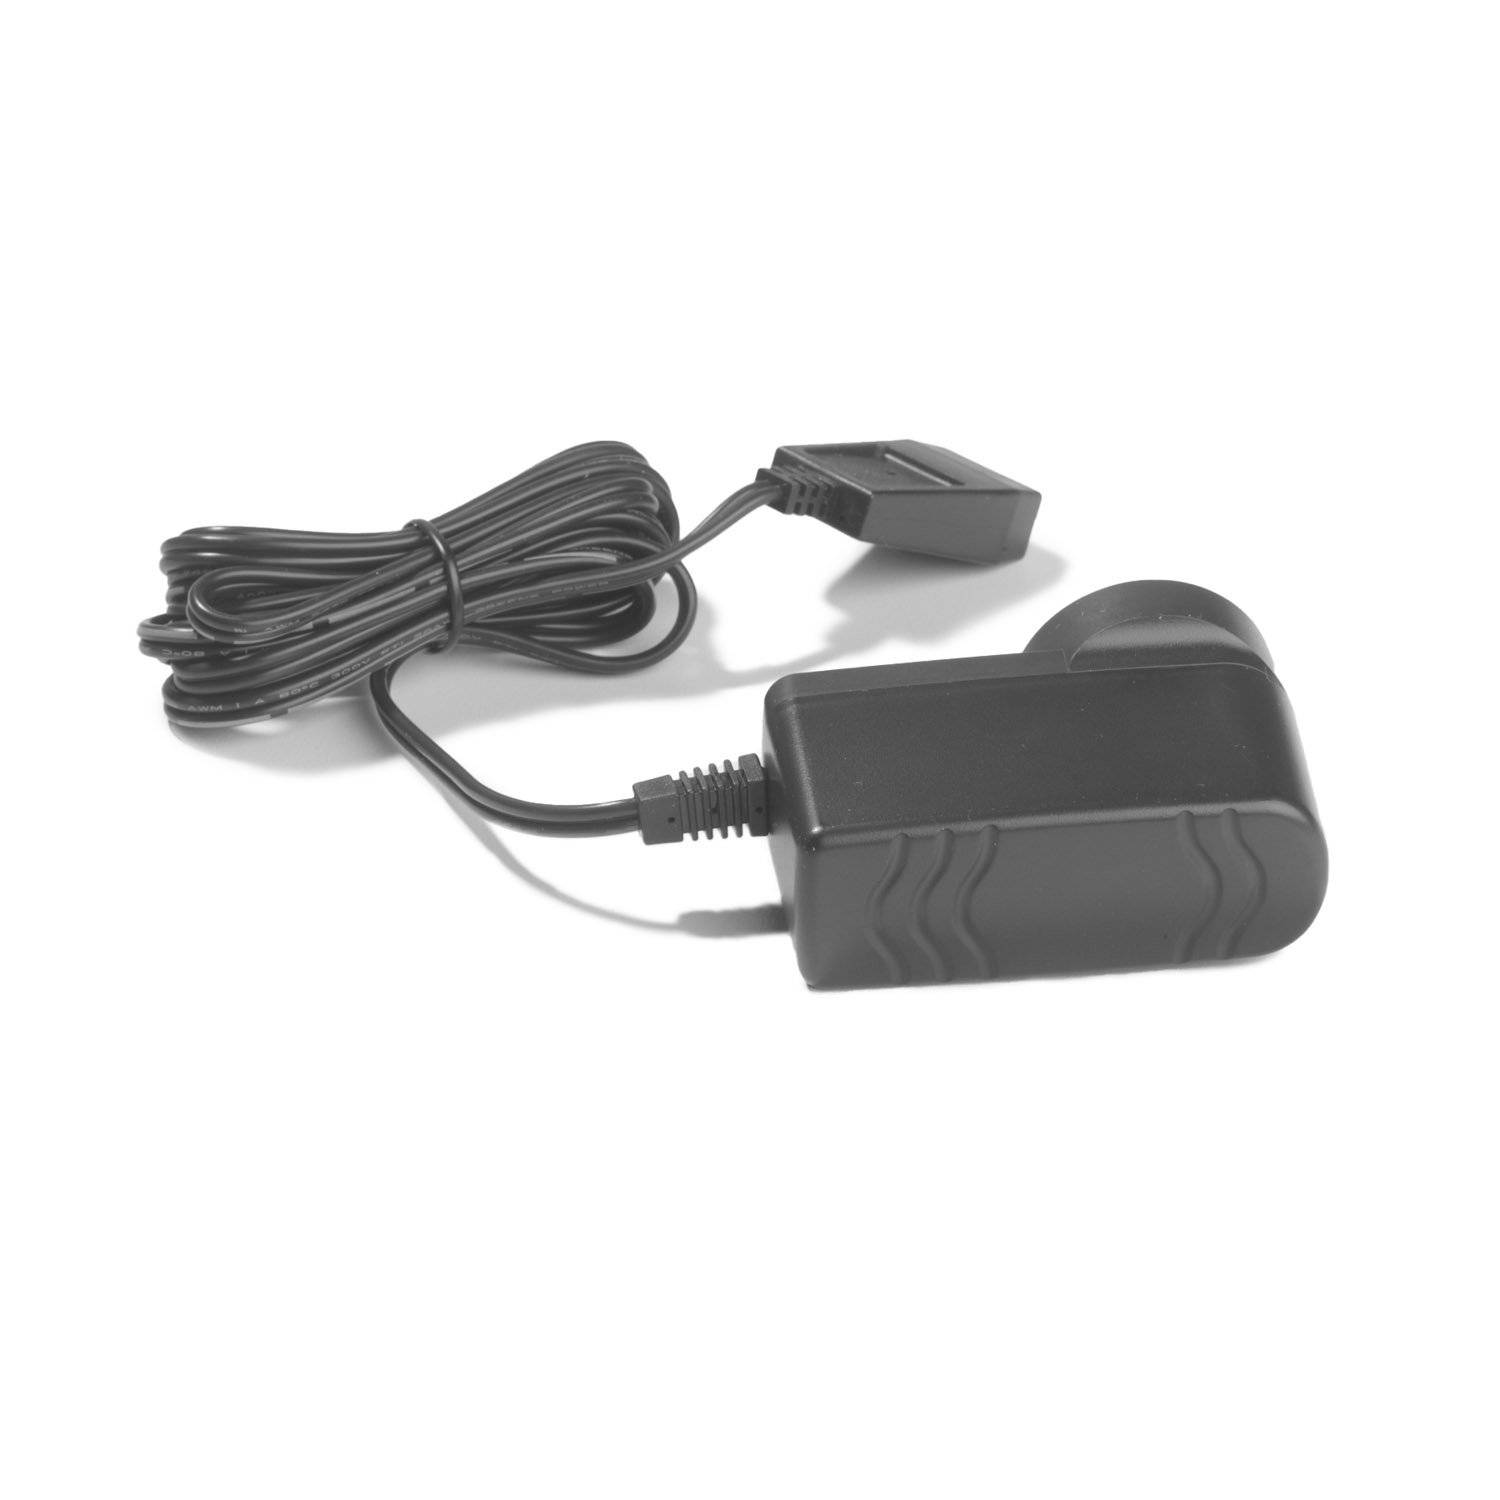 For Streamlight 22311 Stinger Strion AC Power Supply Charger Cord Rechargeable